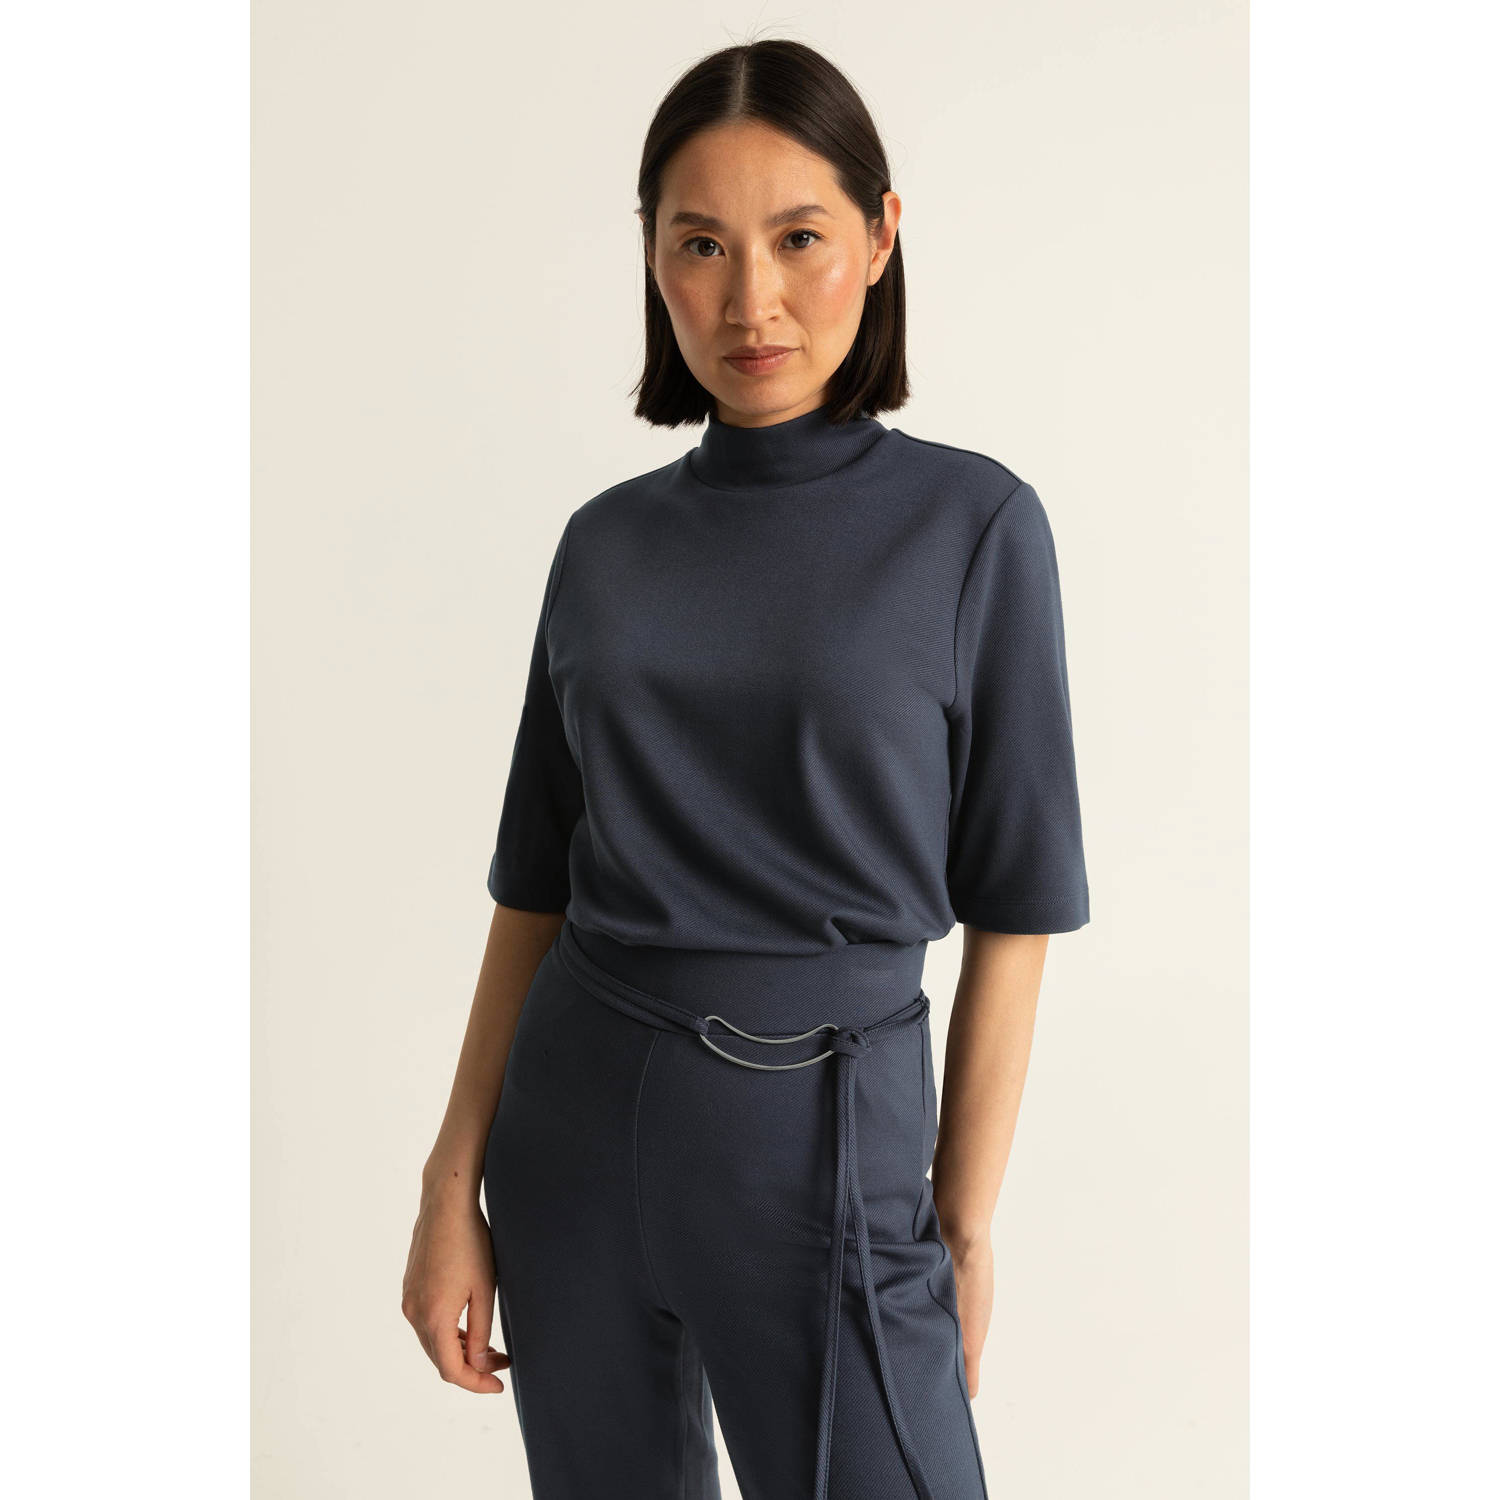 Expresso top donkerblauw